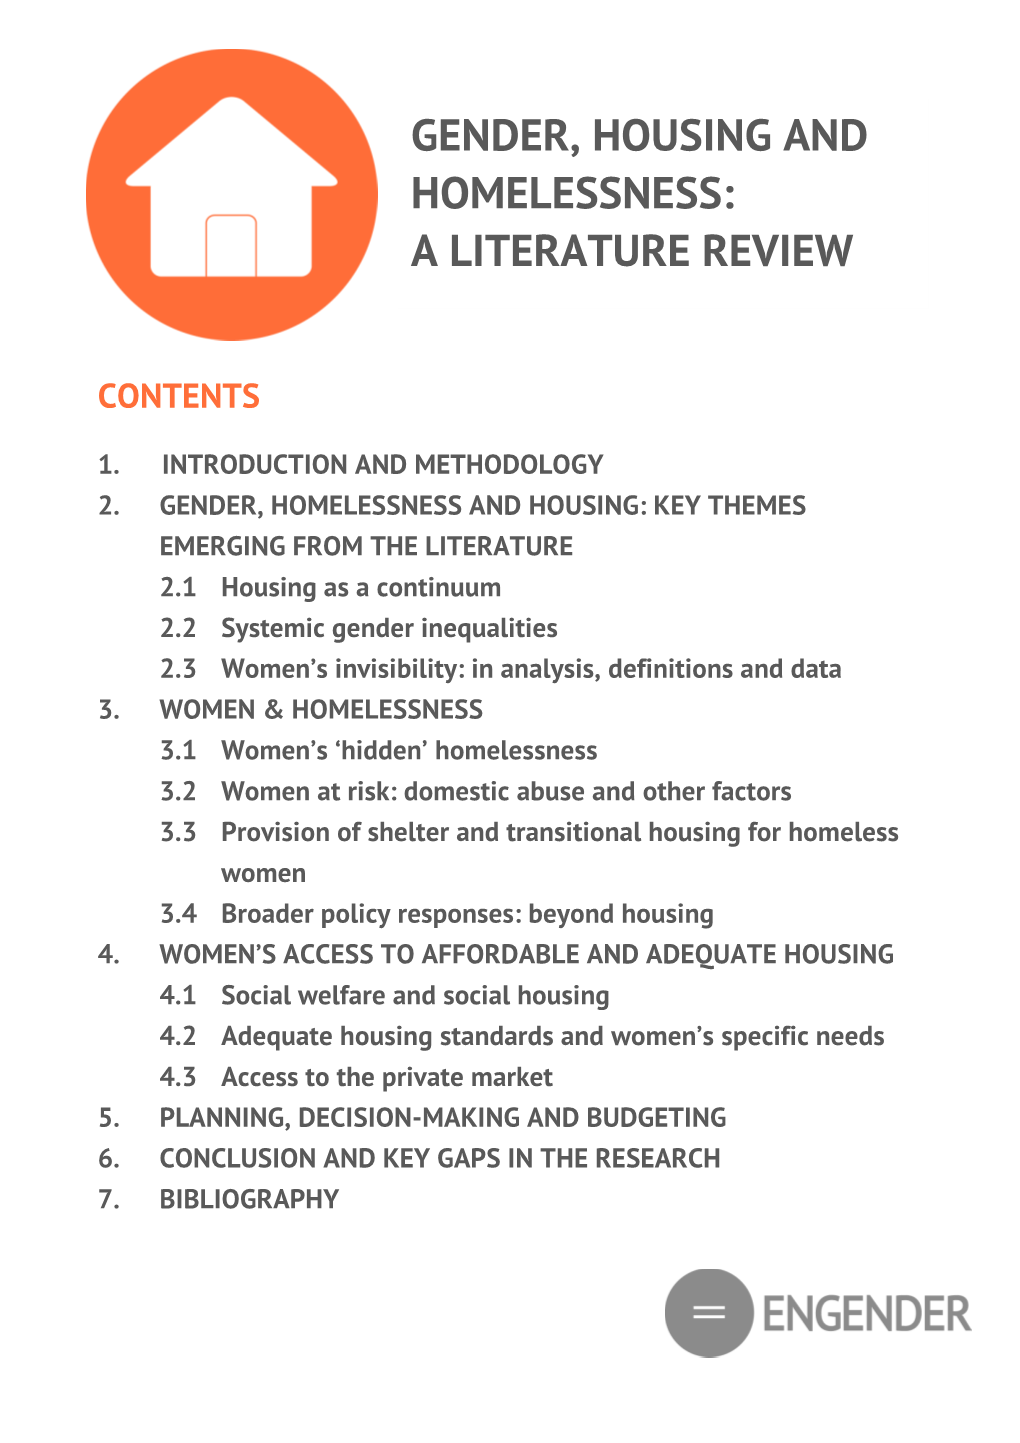 Gender, Housing and Homelessness: a Literature Review